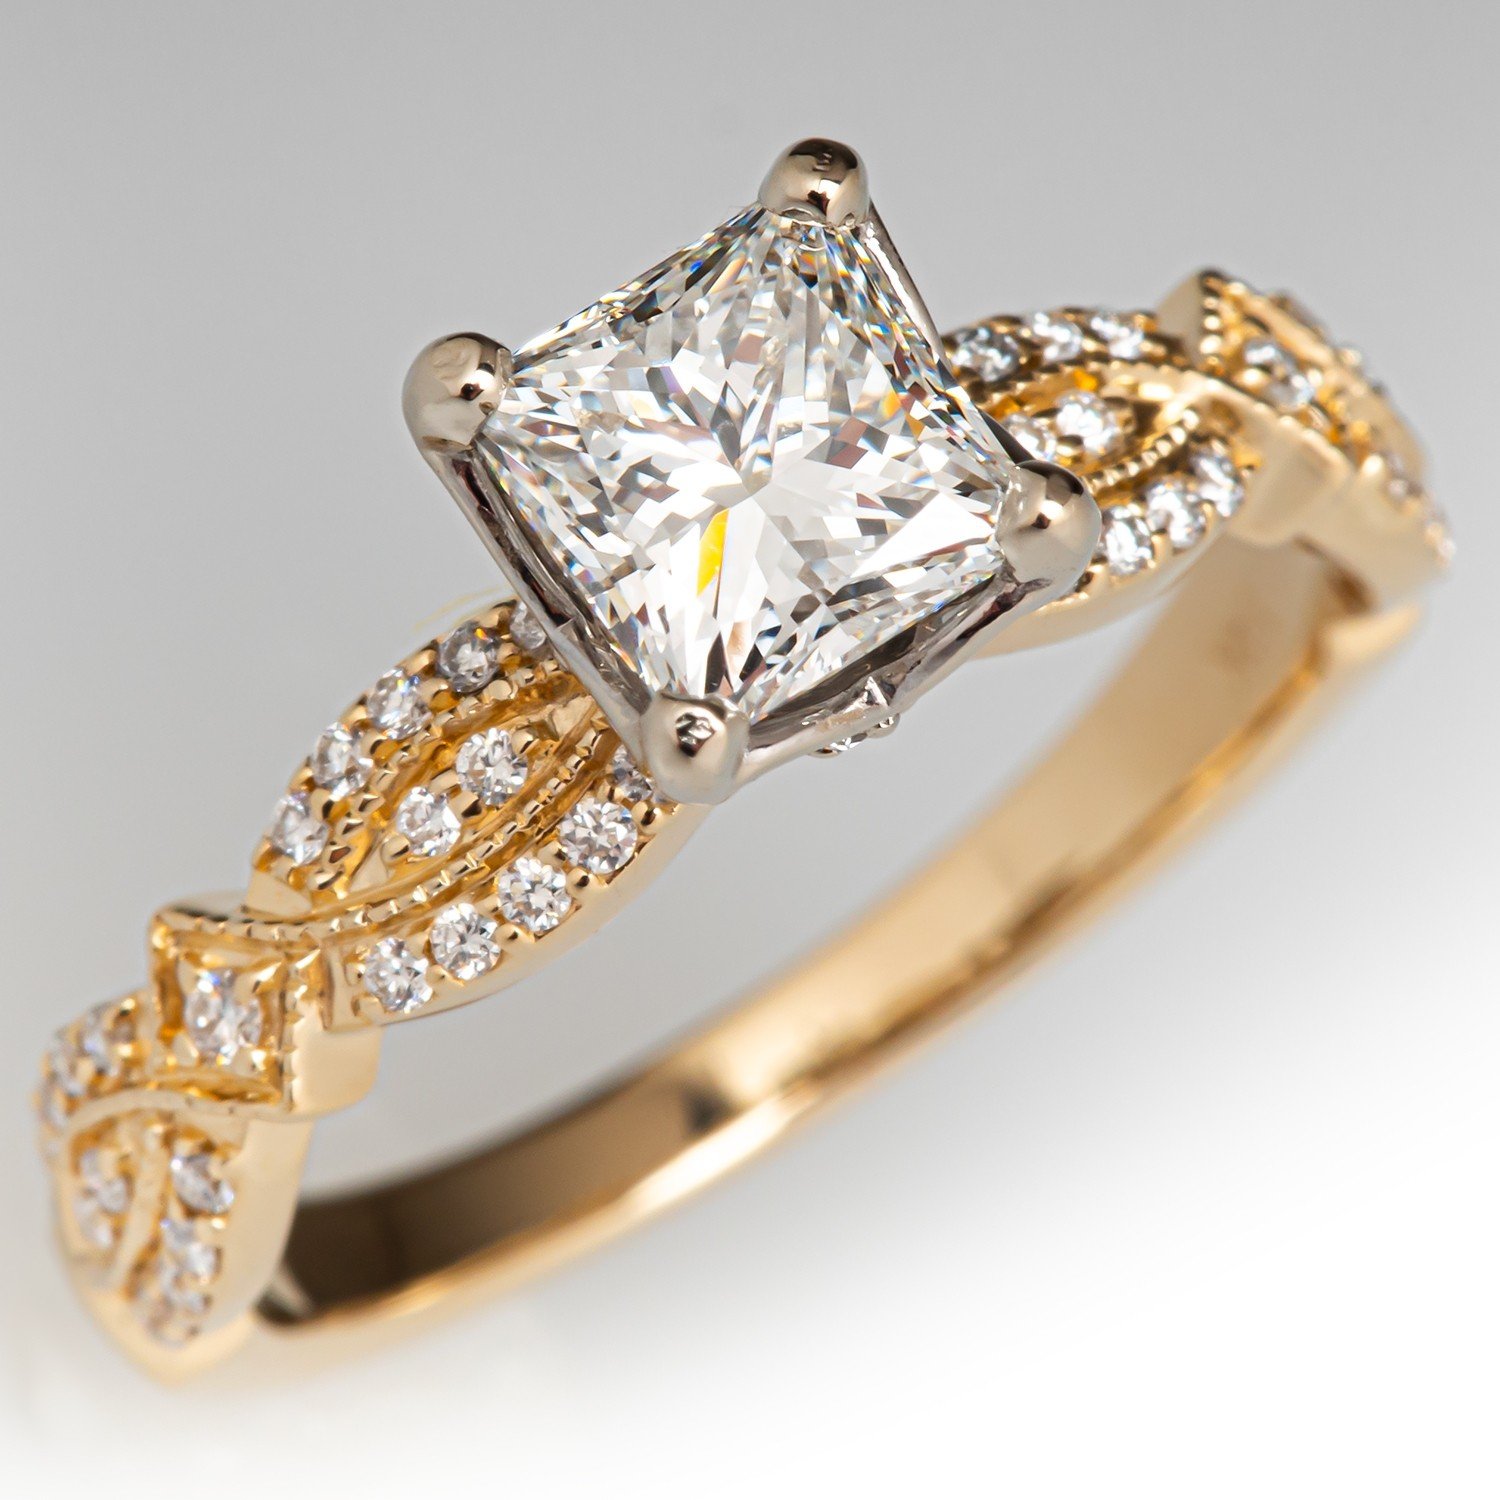 Here are some beautiful engagement rings for couples - Styl Inc